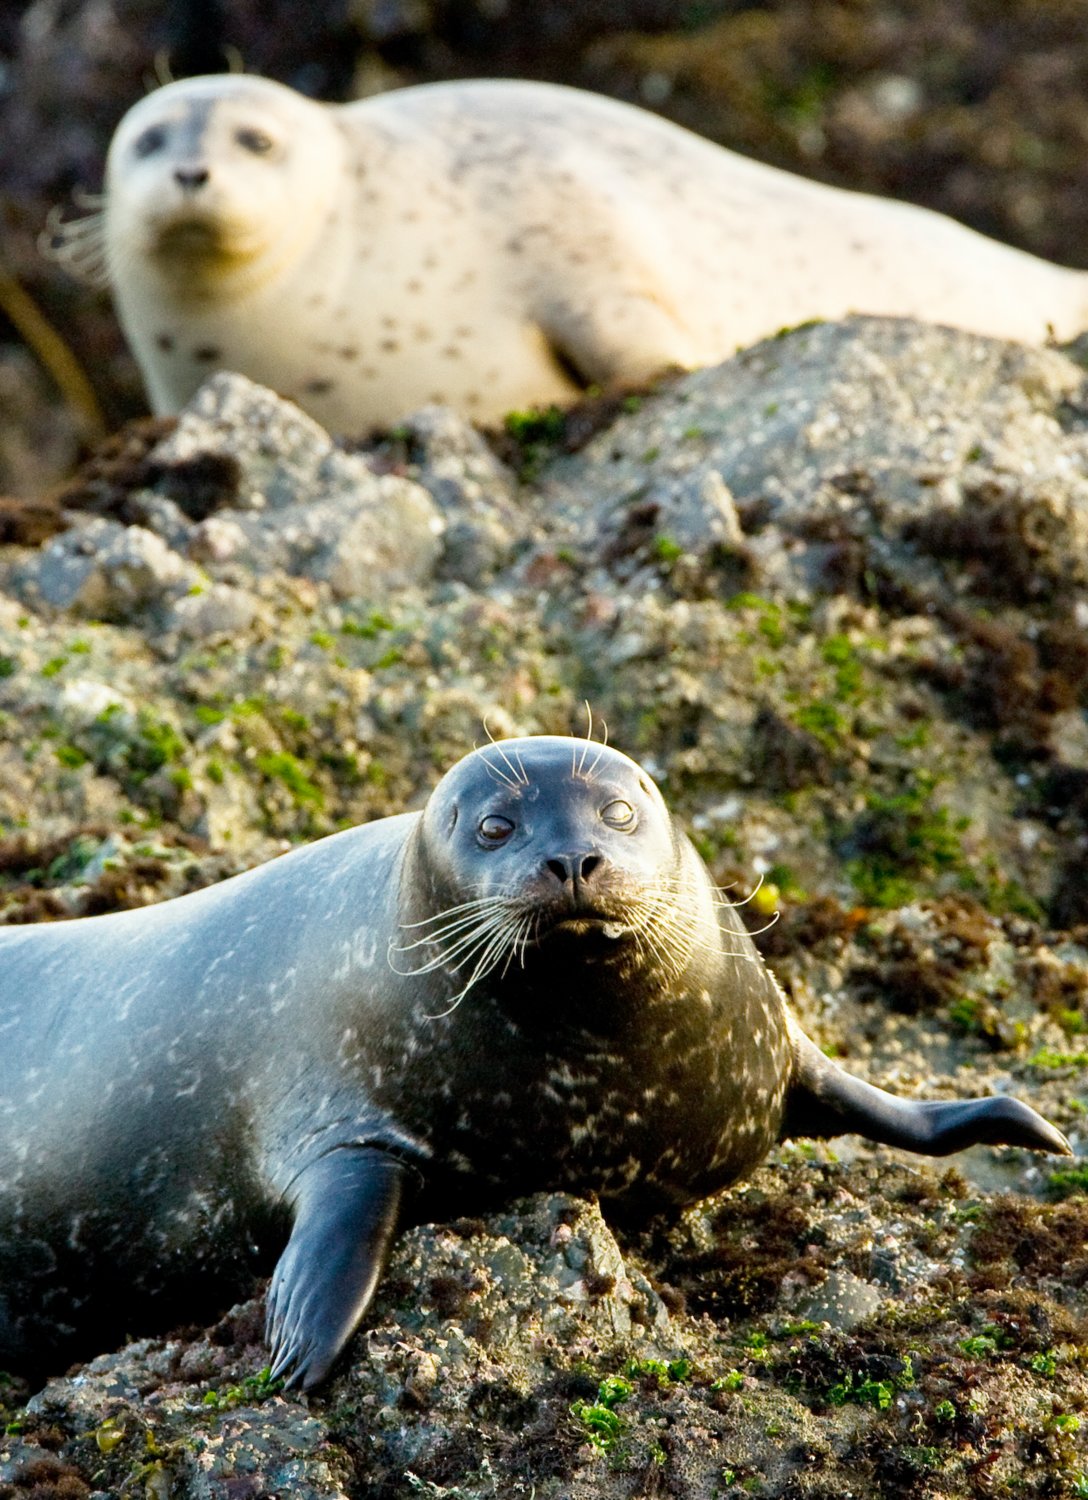 Early spring is the perfect time to witness cold-weather loving seals in their natural habitat